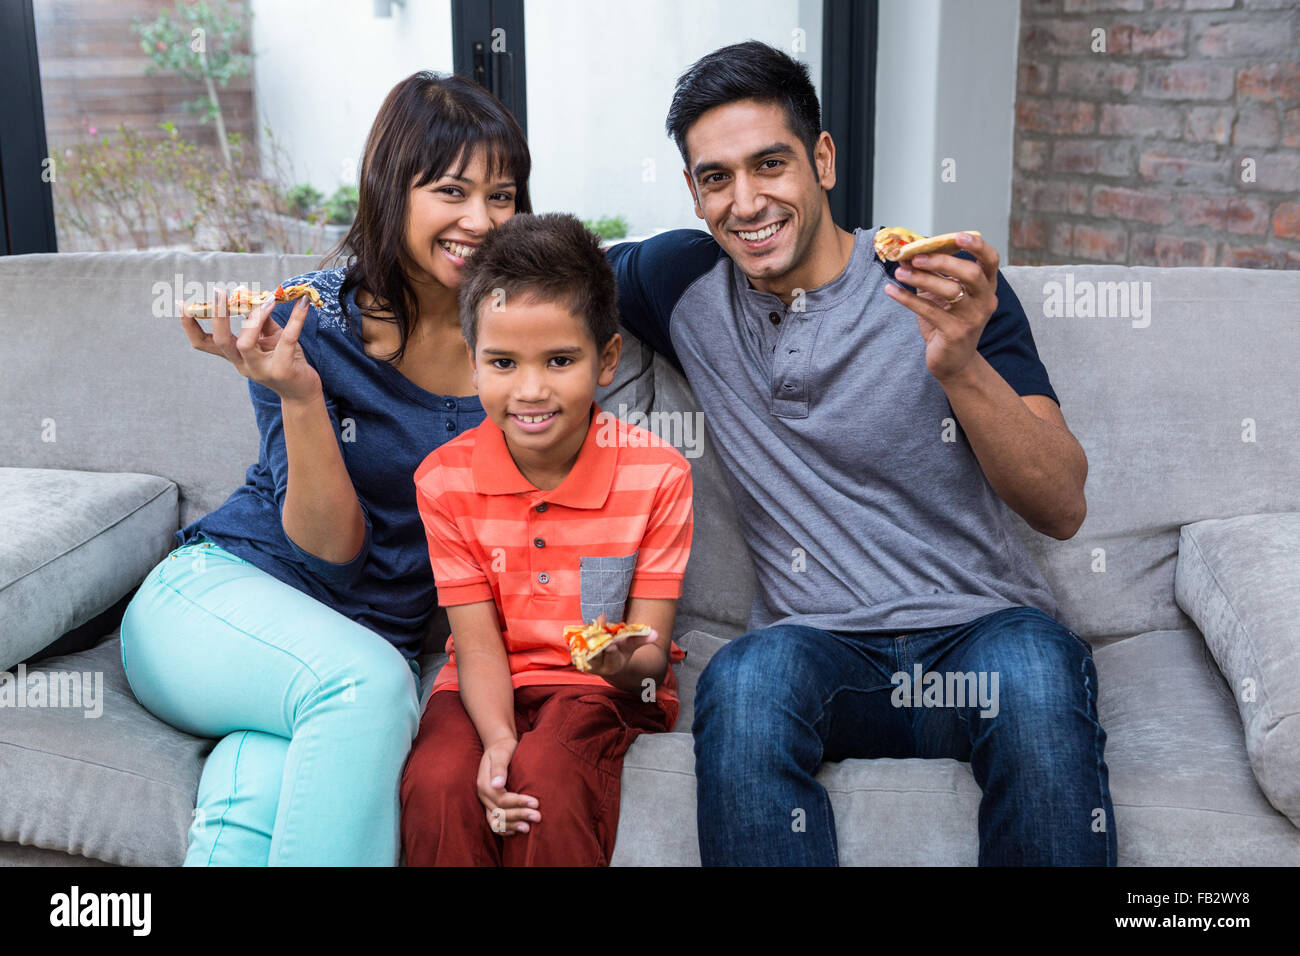 Smiling family eating pizza on the sofa Stock Photo